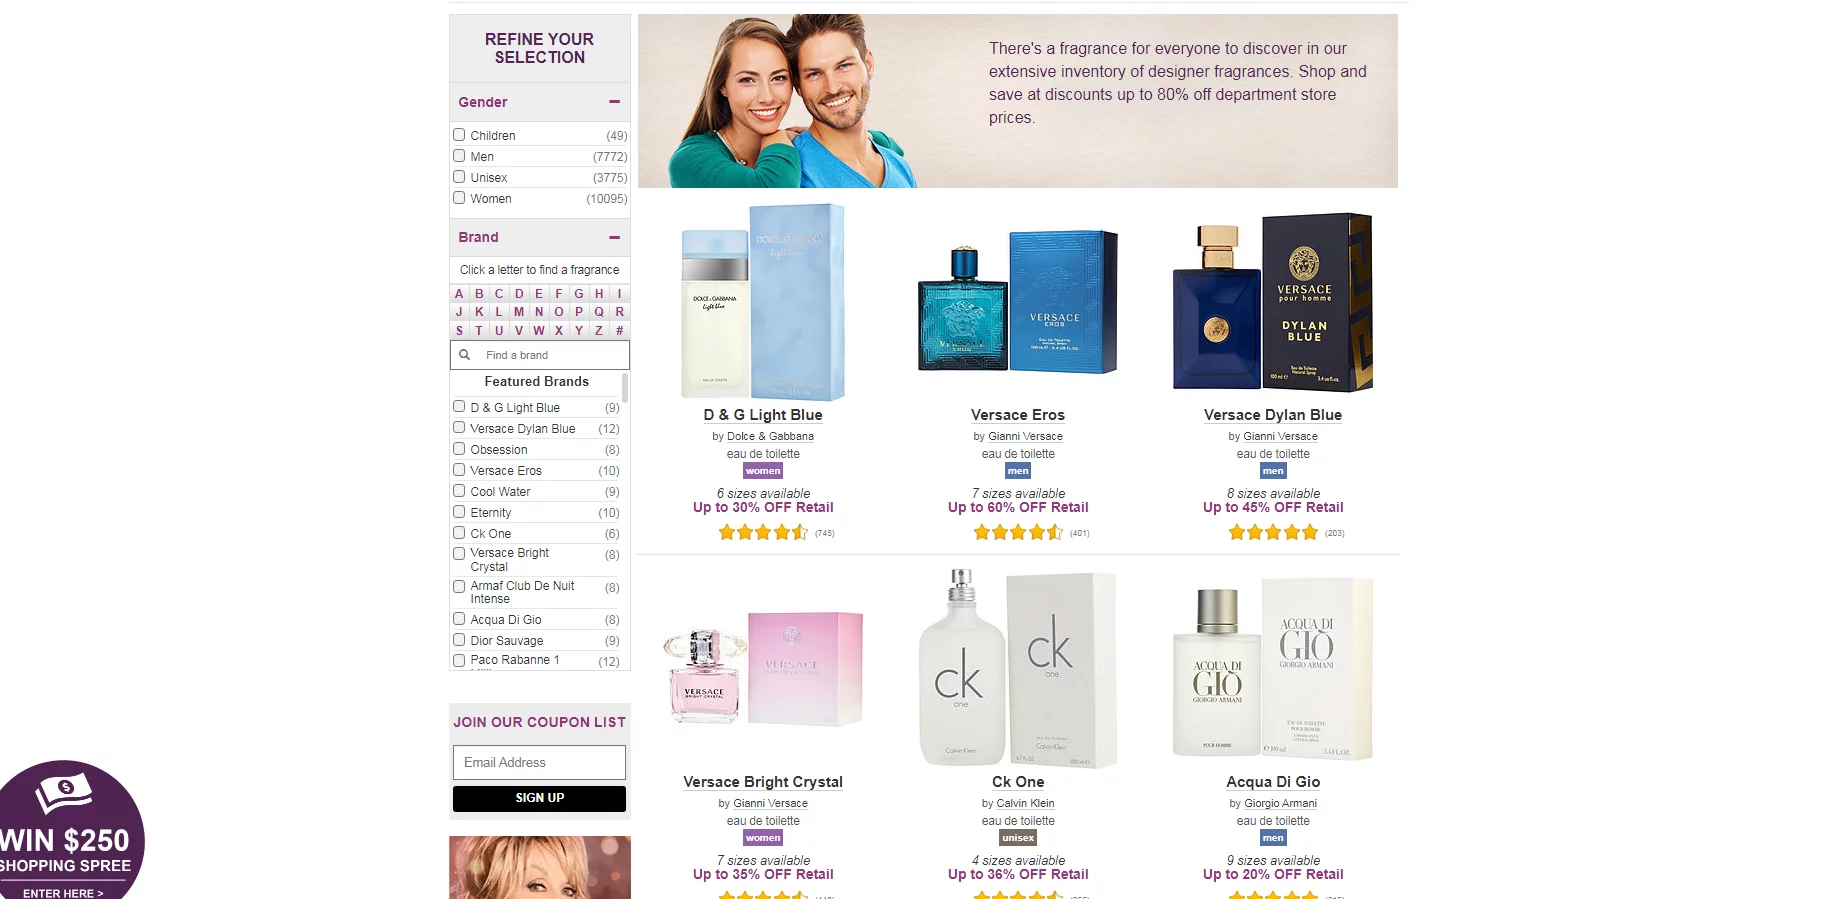 FragranceNet's Collection of Fragrances and Beauty Products